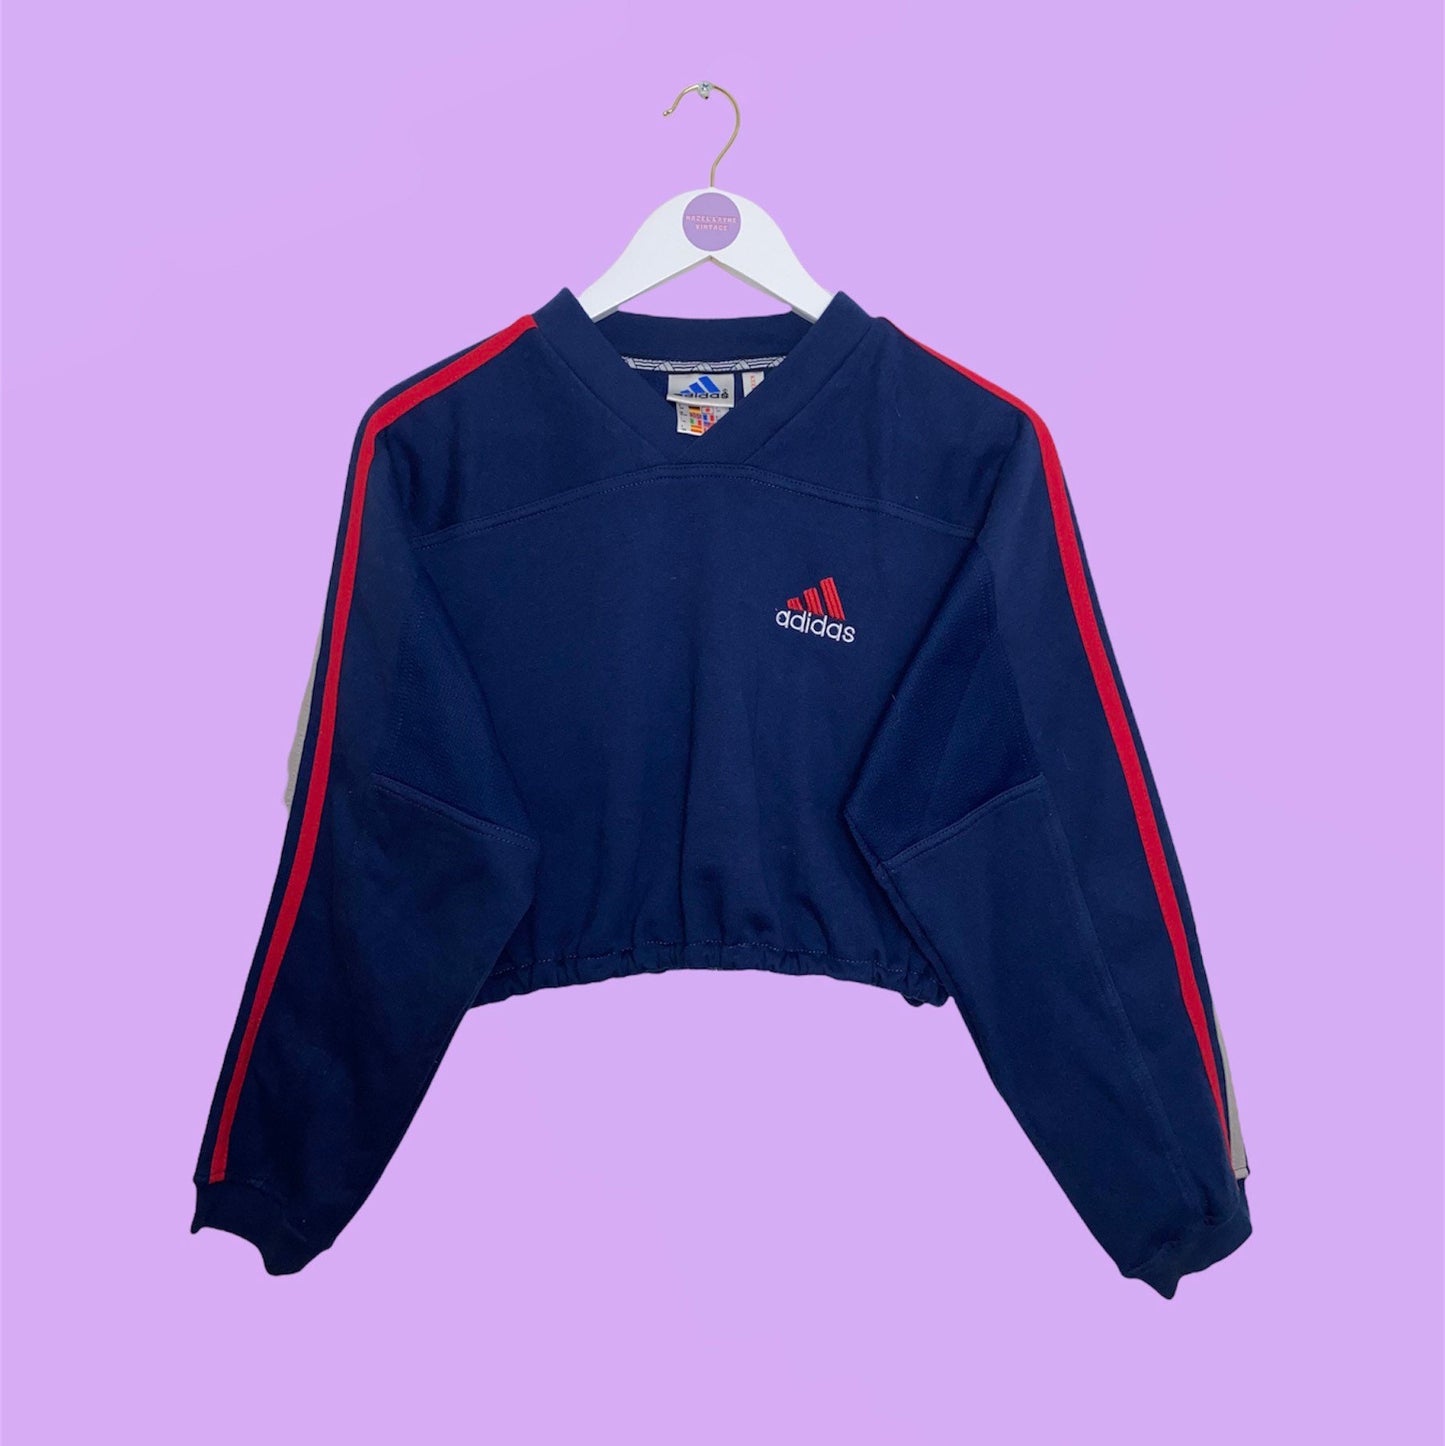 navy v neck cropped sweatshirt with red small adidas text and white symbol logo shown on a white clothes hanger on a lilac background